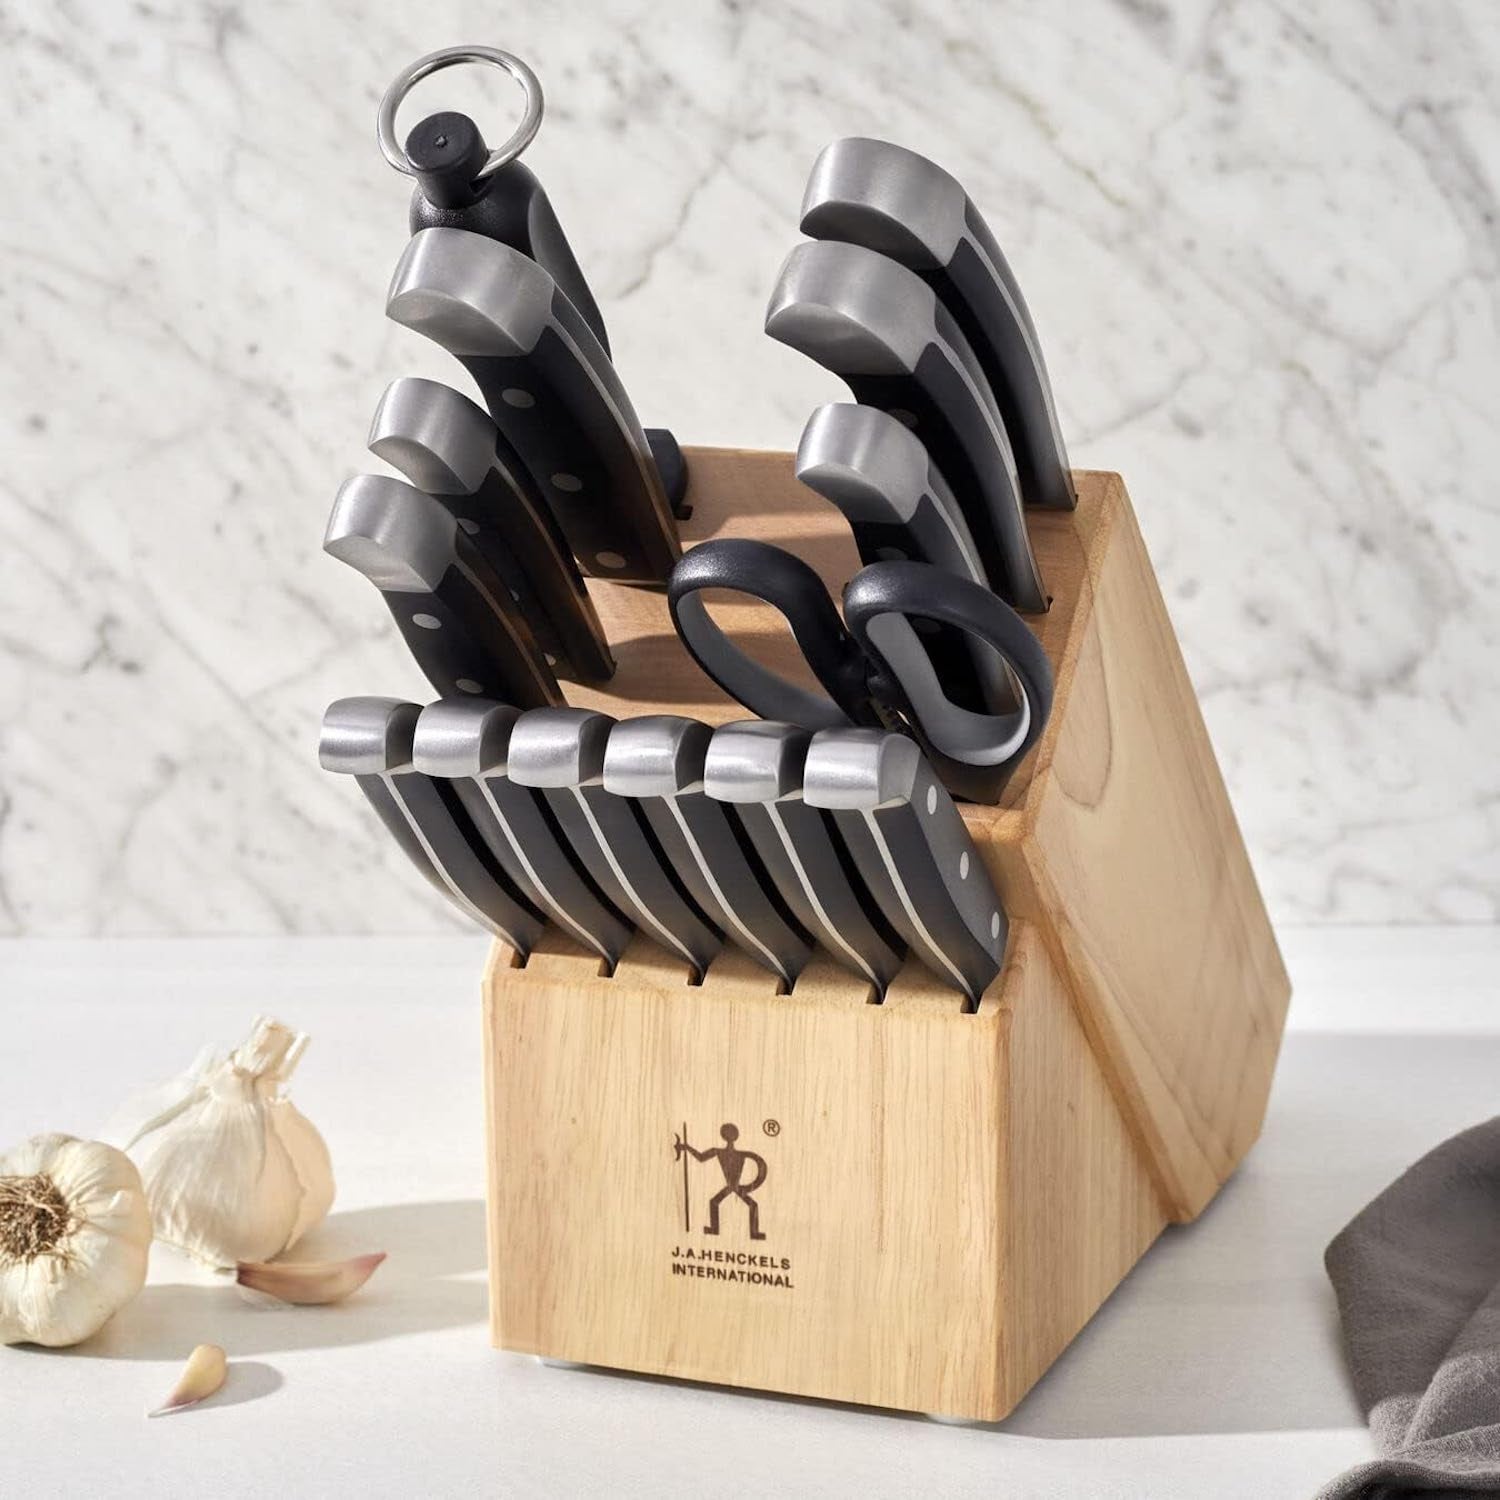 The best kitchen knife sets to shop in 2023 for every budget